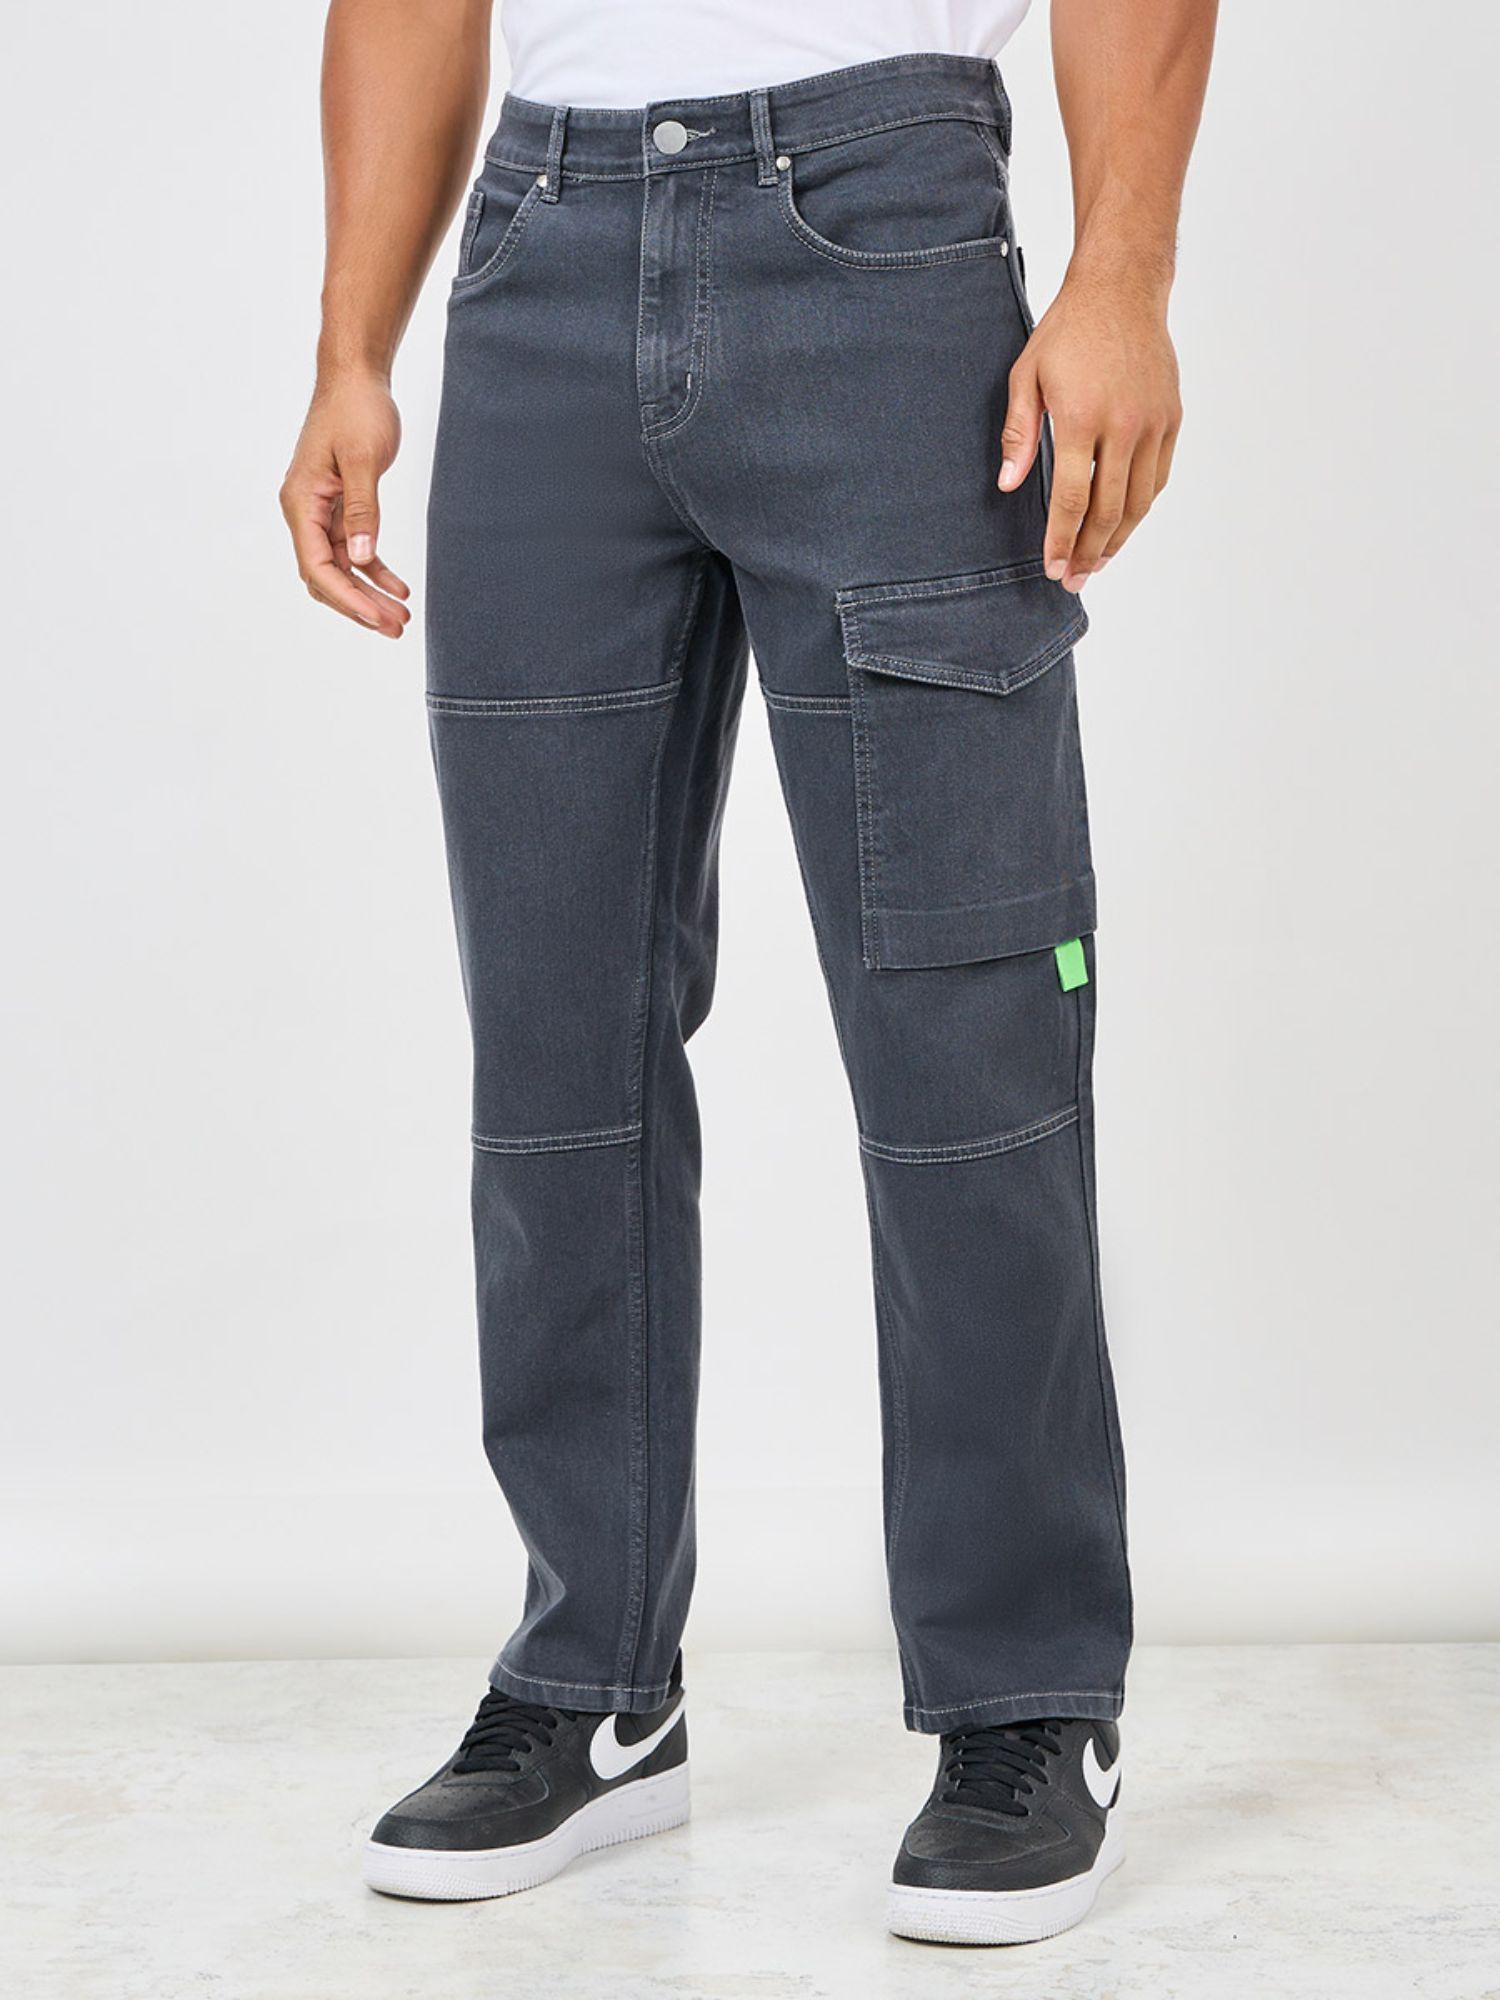 men's-grey-wash-cargo-relaxed-fit-cotton-jean